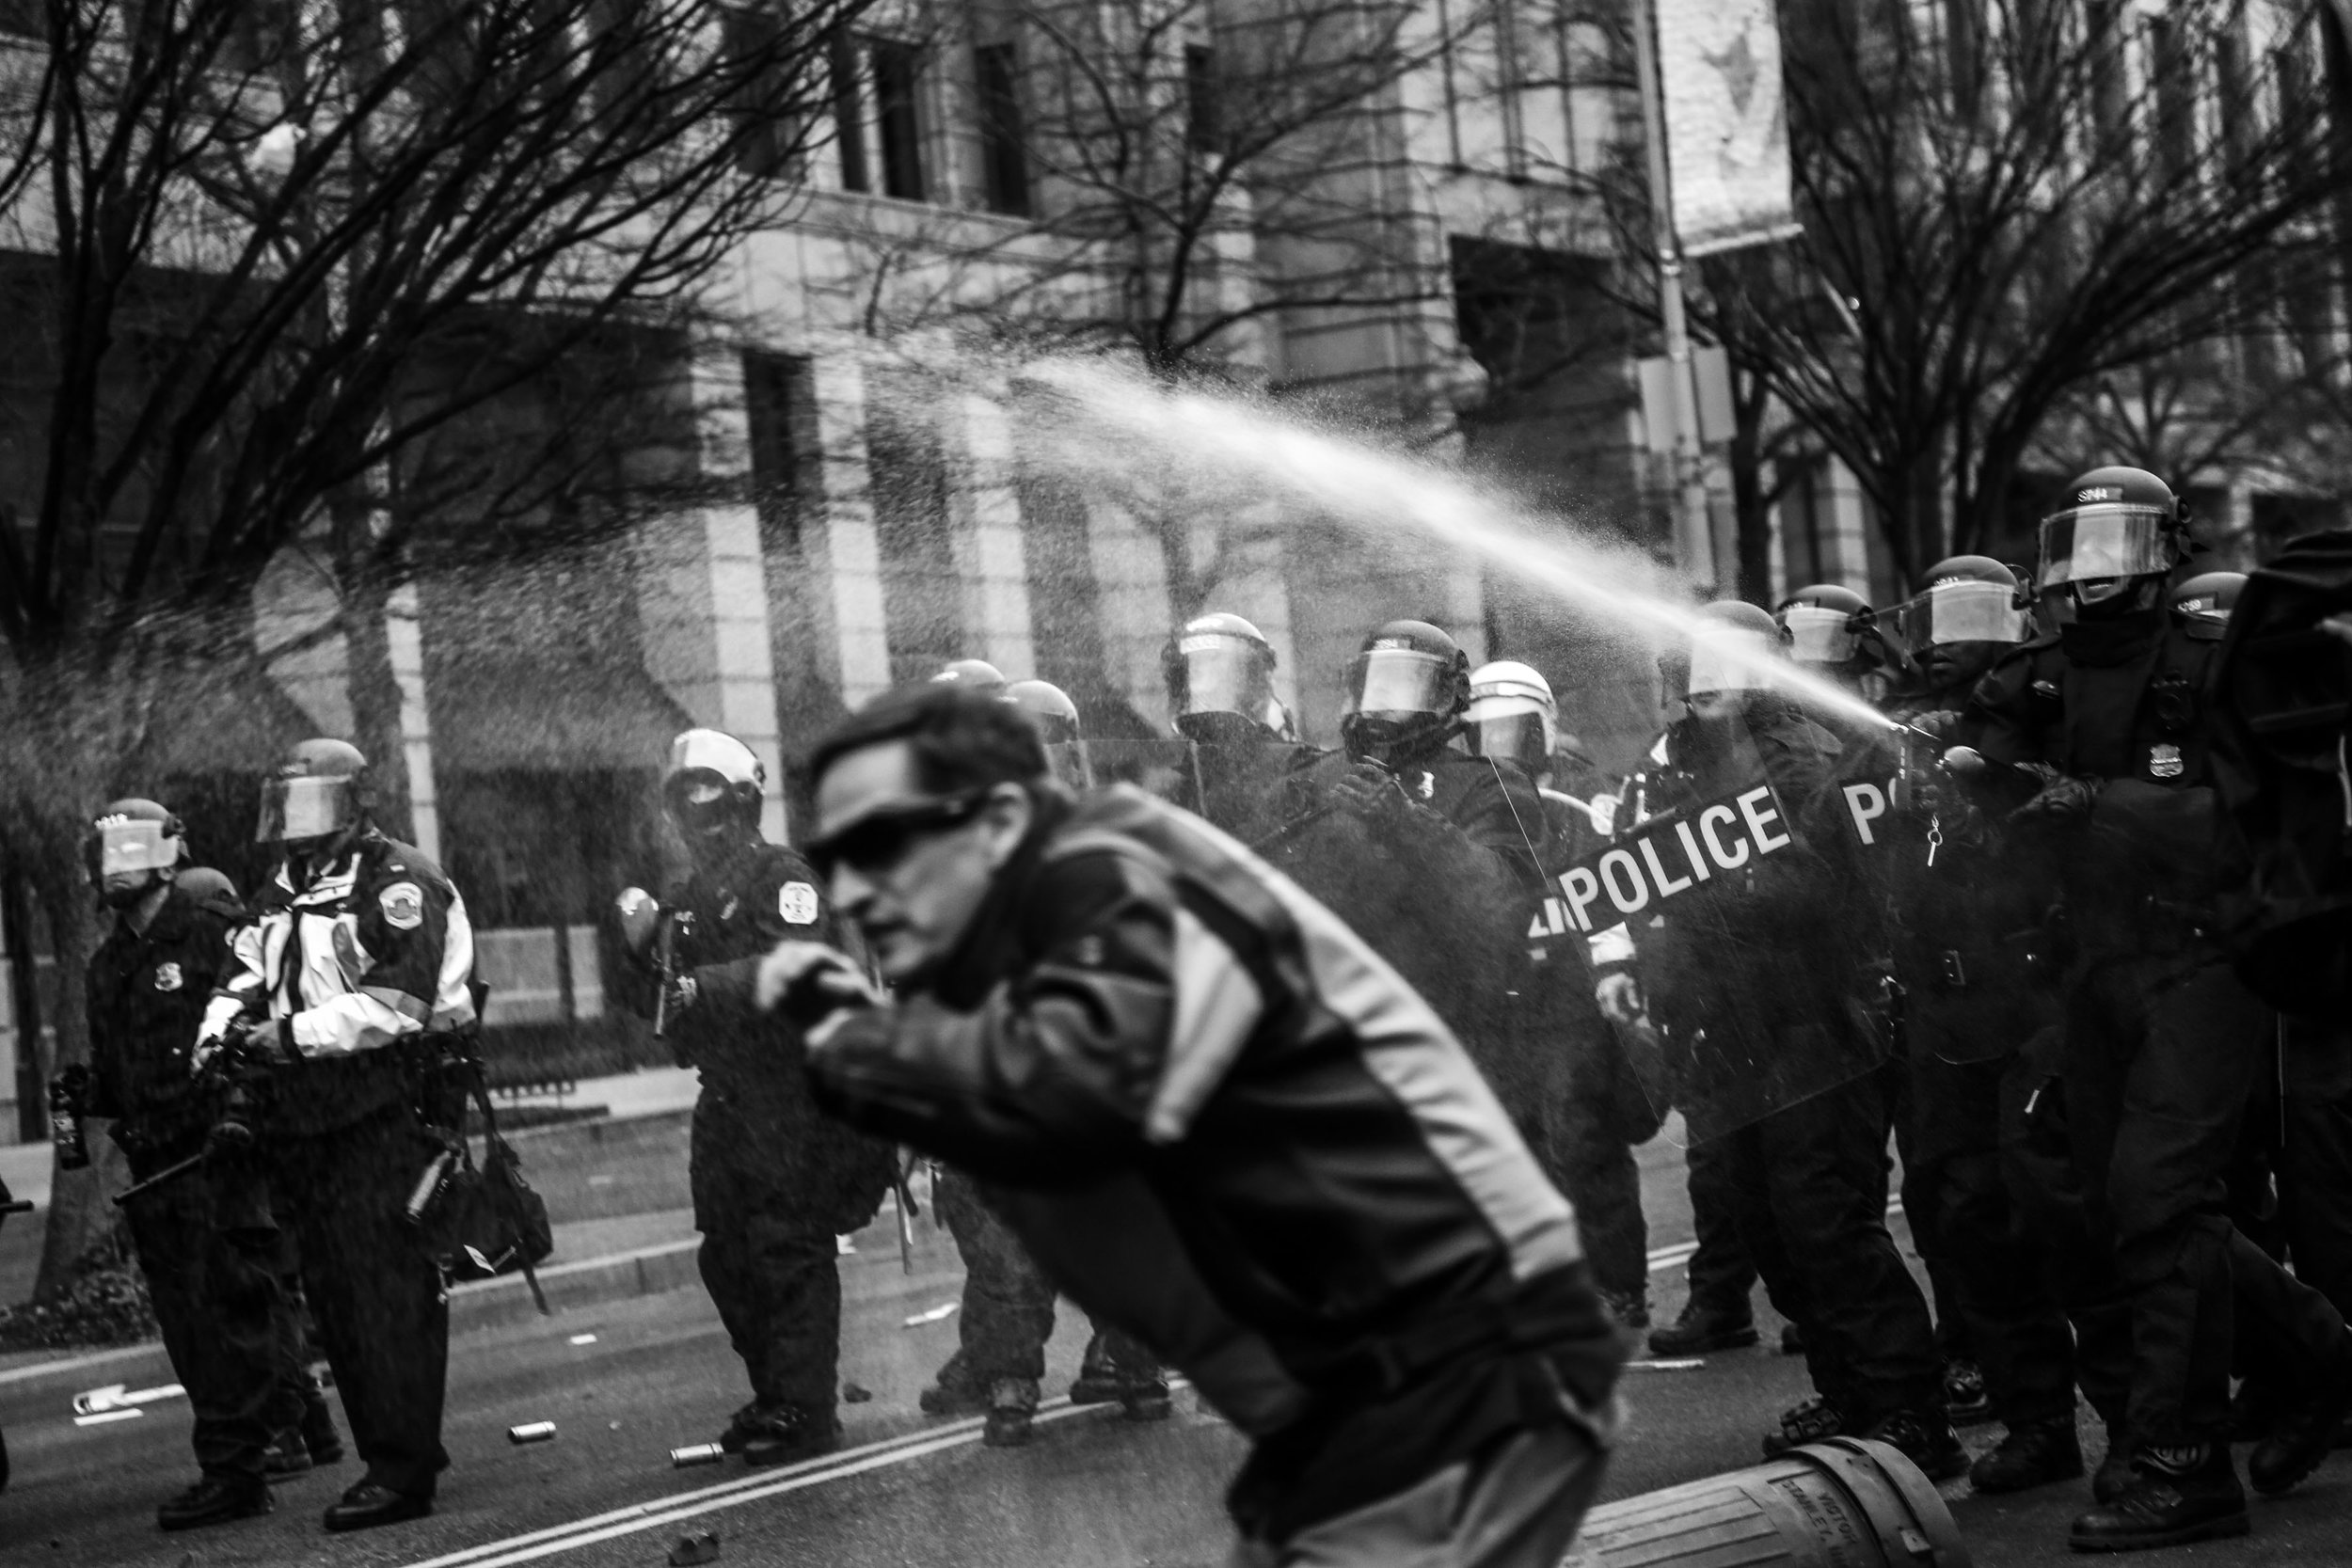   Police officers wearing riot gear spray protesters with pepper spray on K St. N.W.,&nbsp;hours after President Trump was sworn in as the 45th US President.  